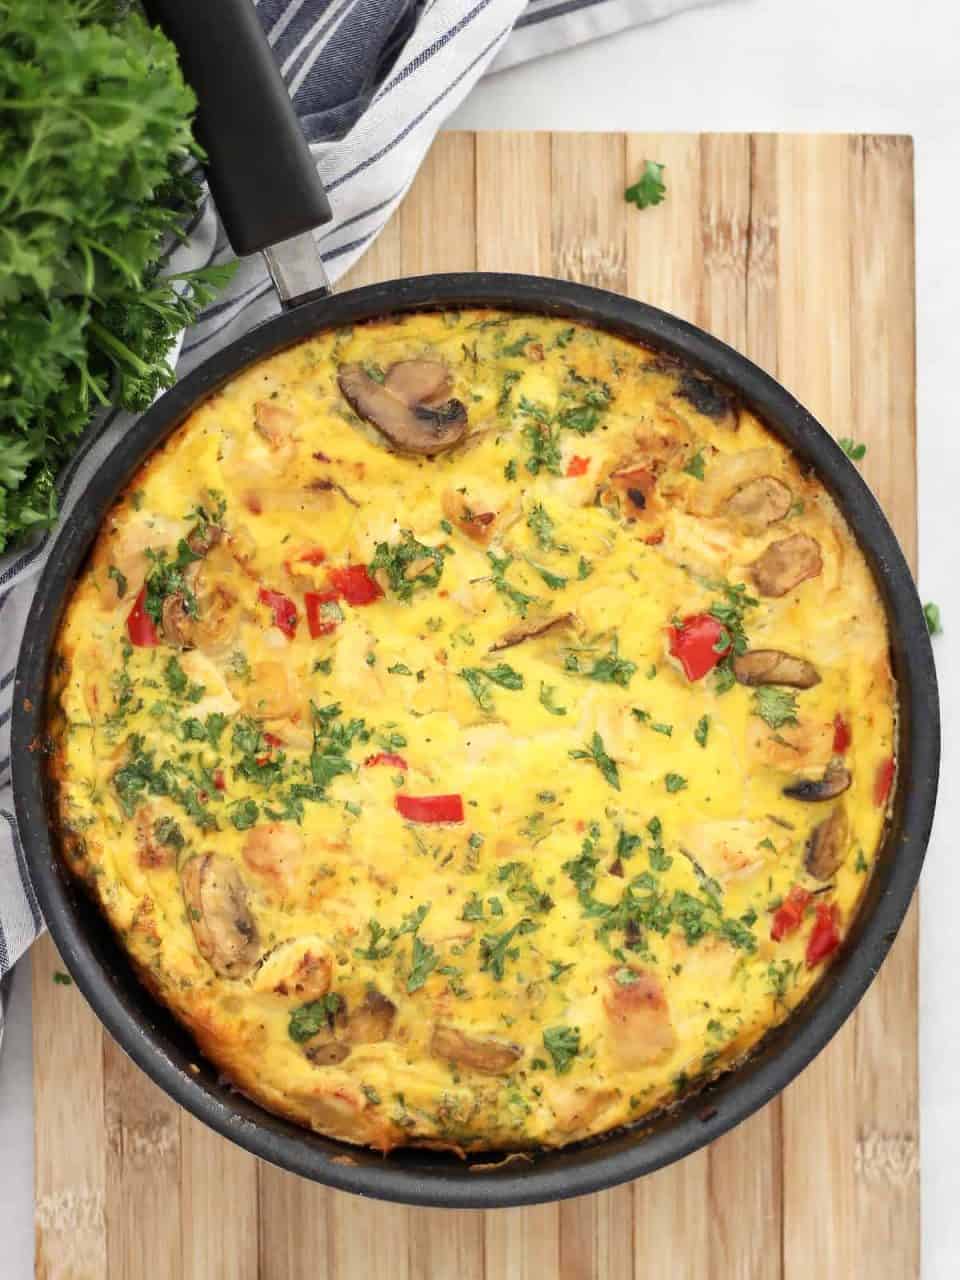 A chicken frittata in a skillet on a wooden chopping board.